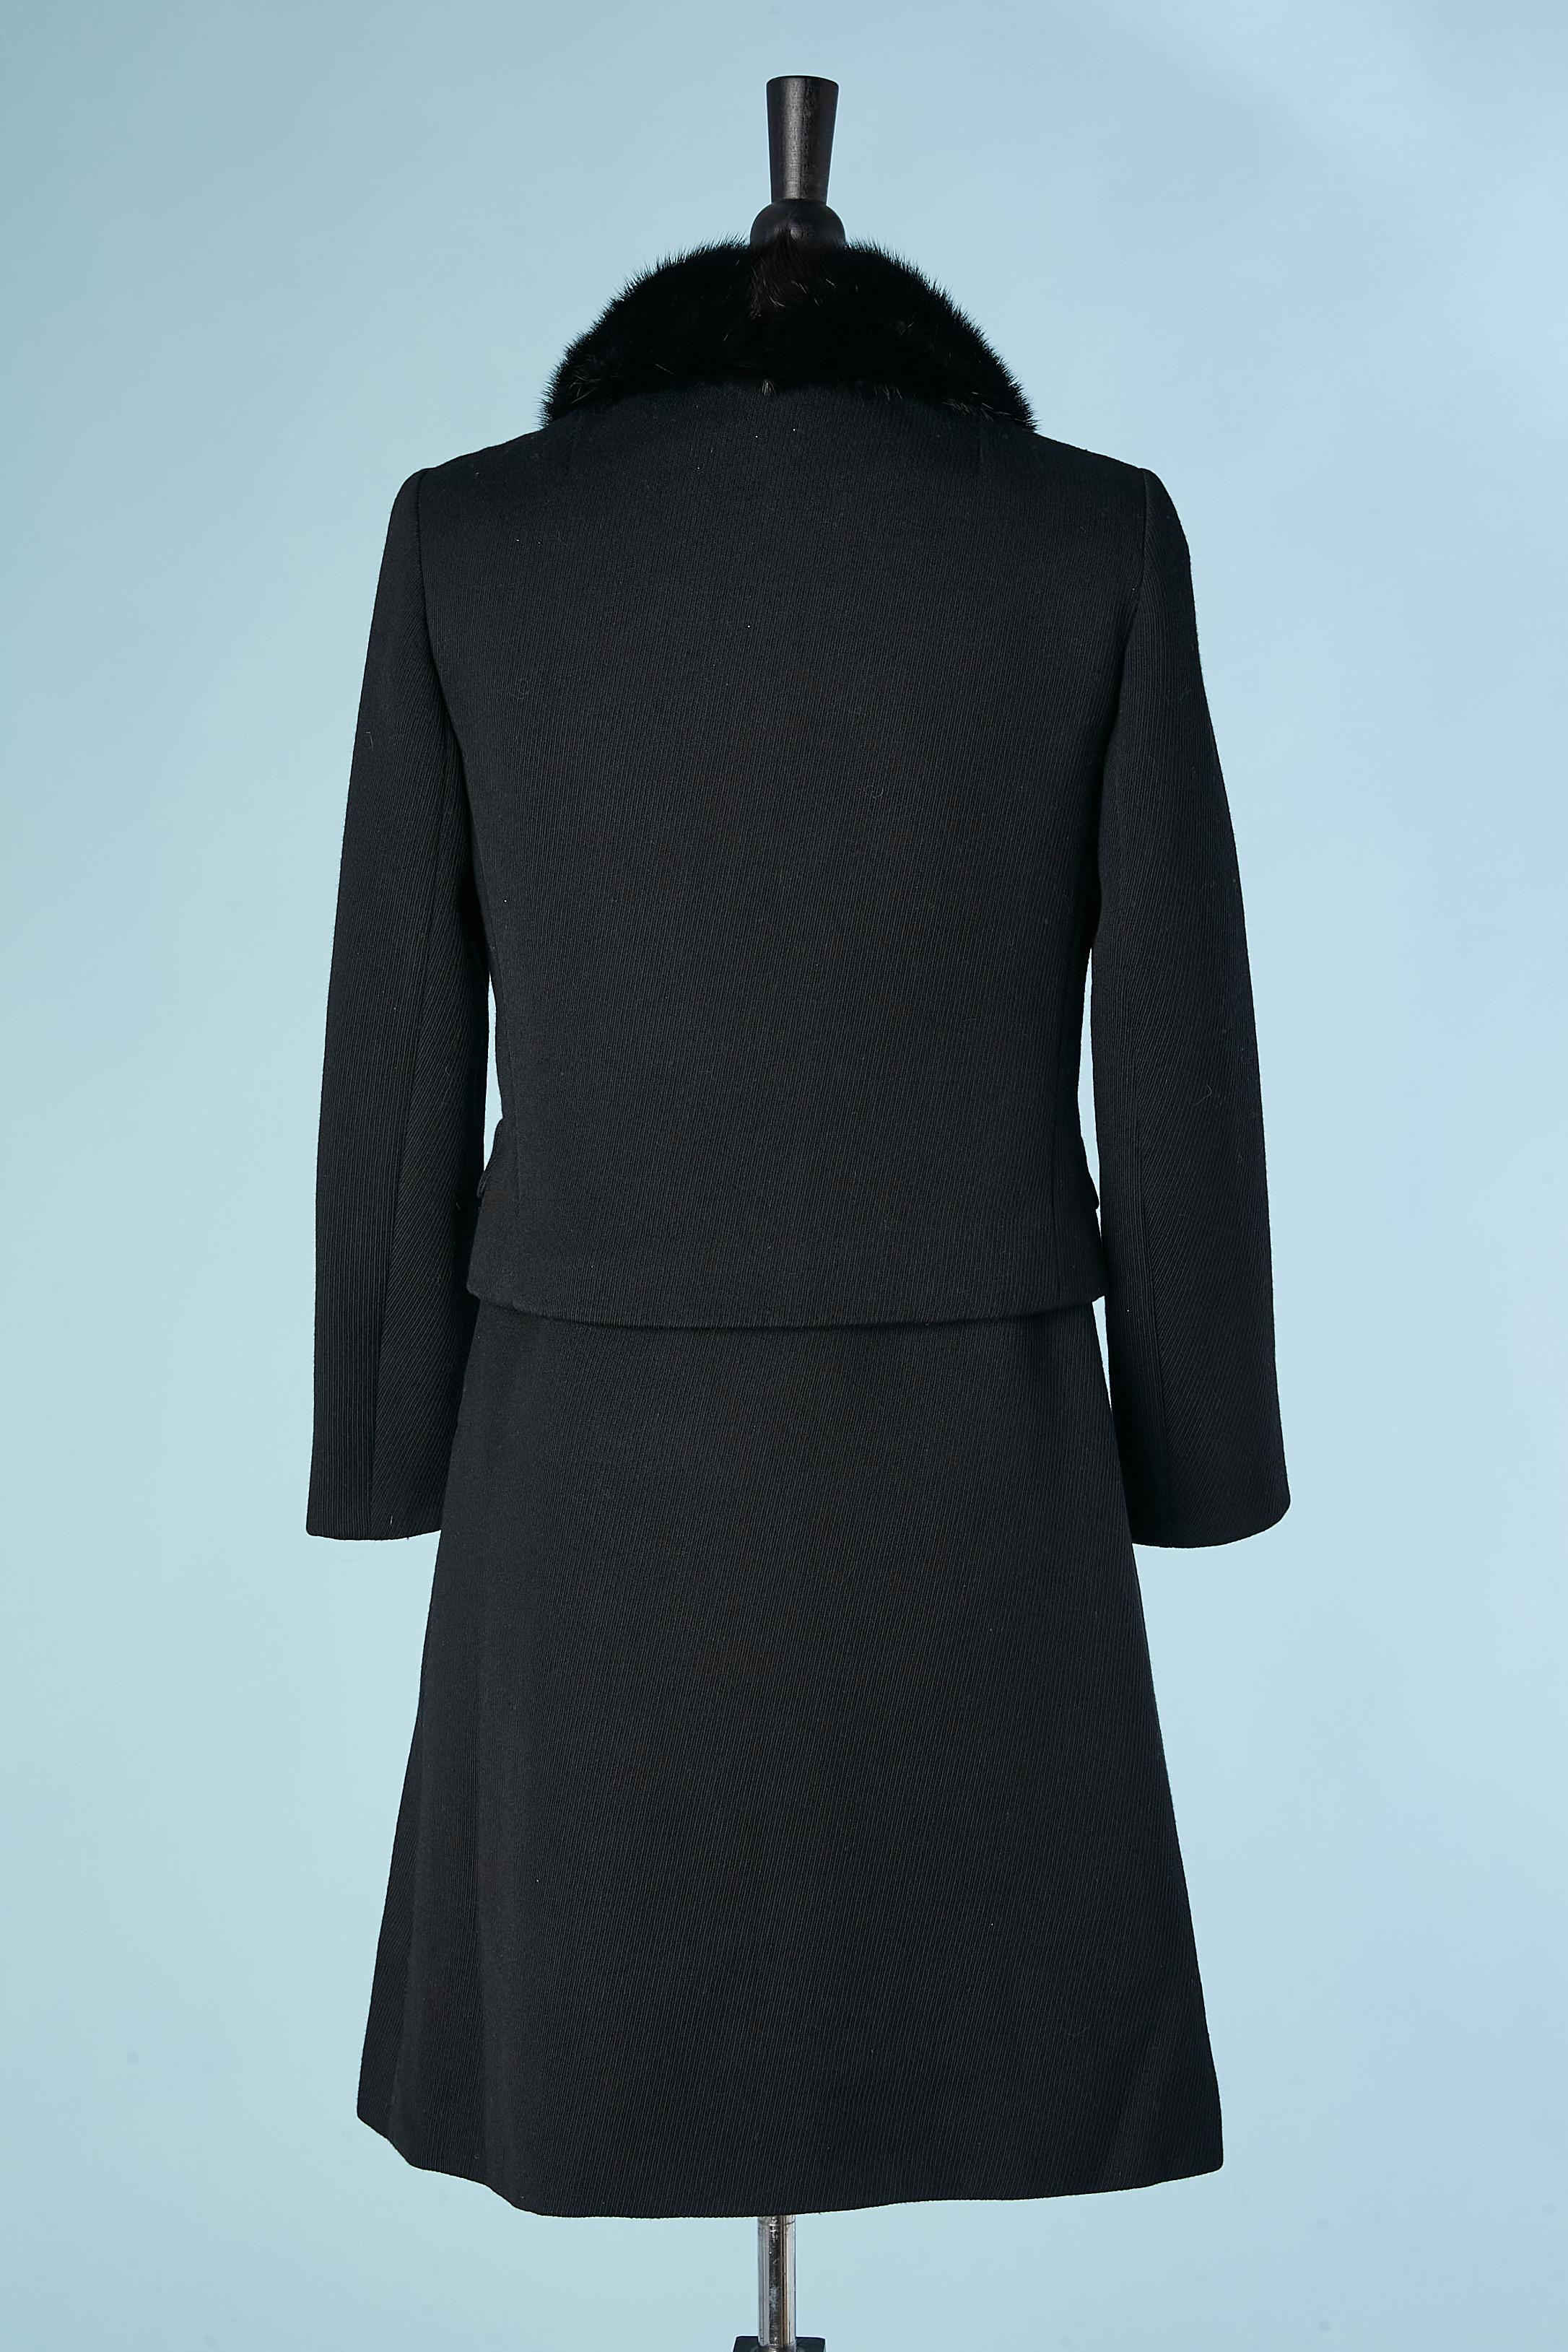 Black wool jacket and dress cocktail ensemble Anna Belletti Roma Circa 1960's For Sale 2